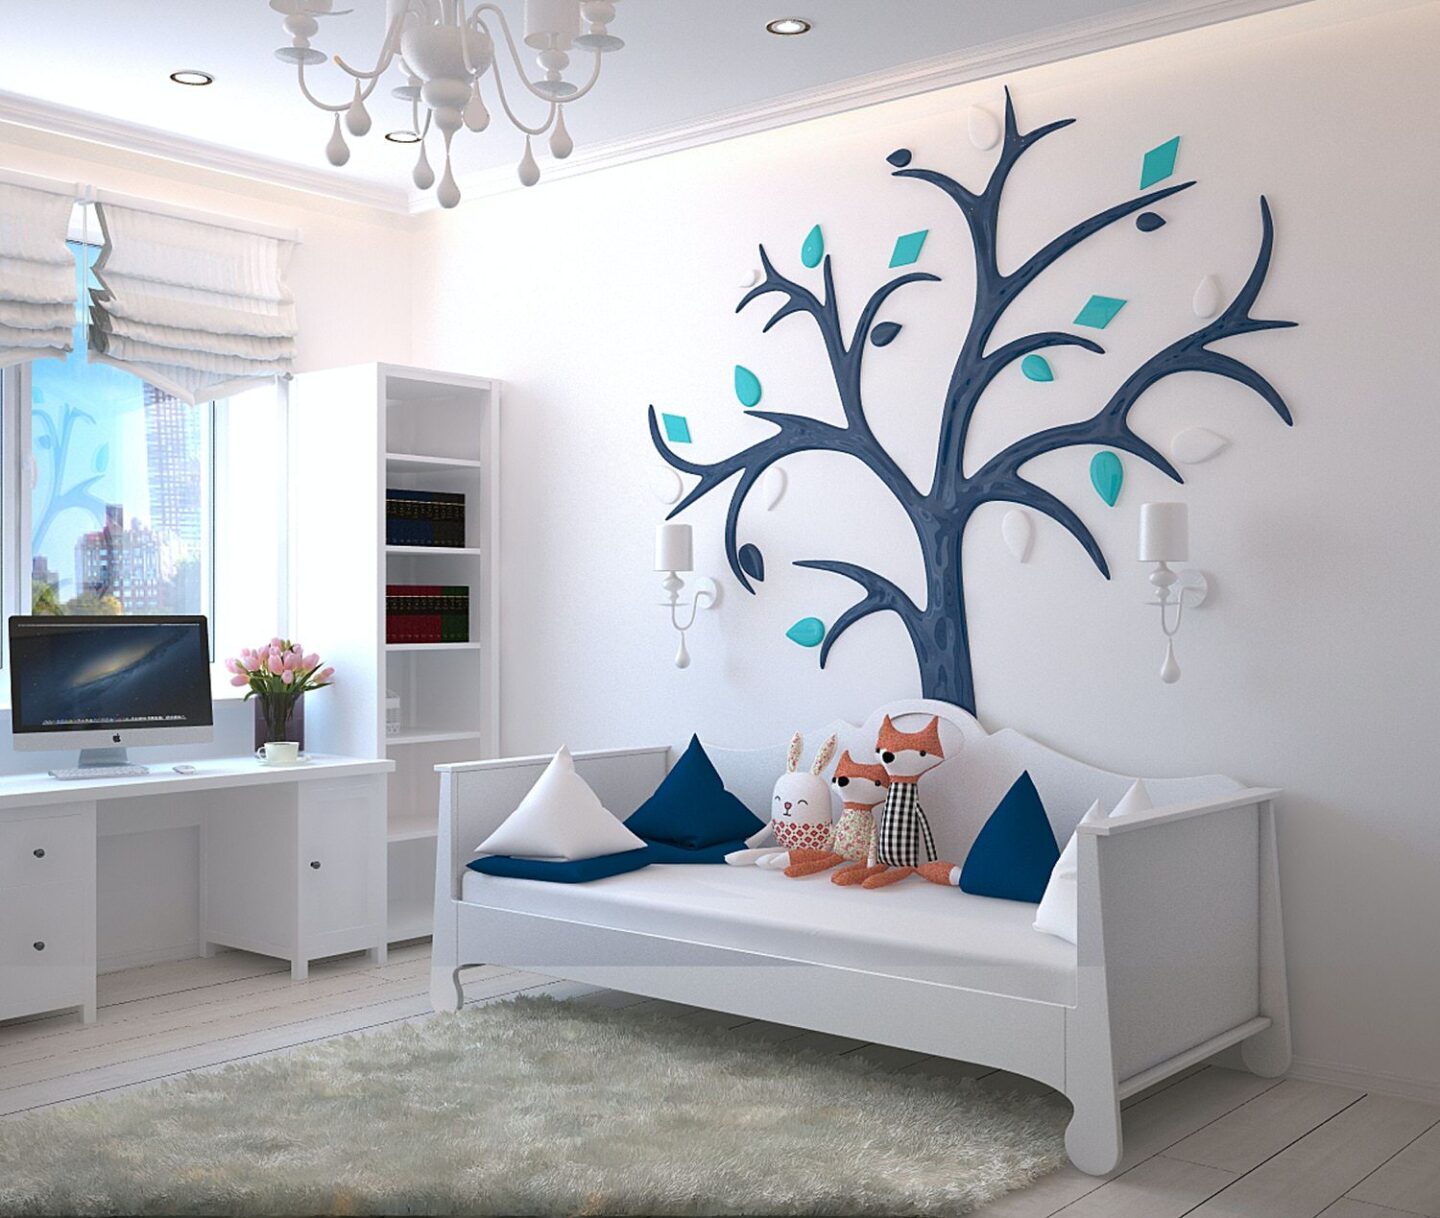 Building the perfect bedroom for your kids